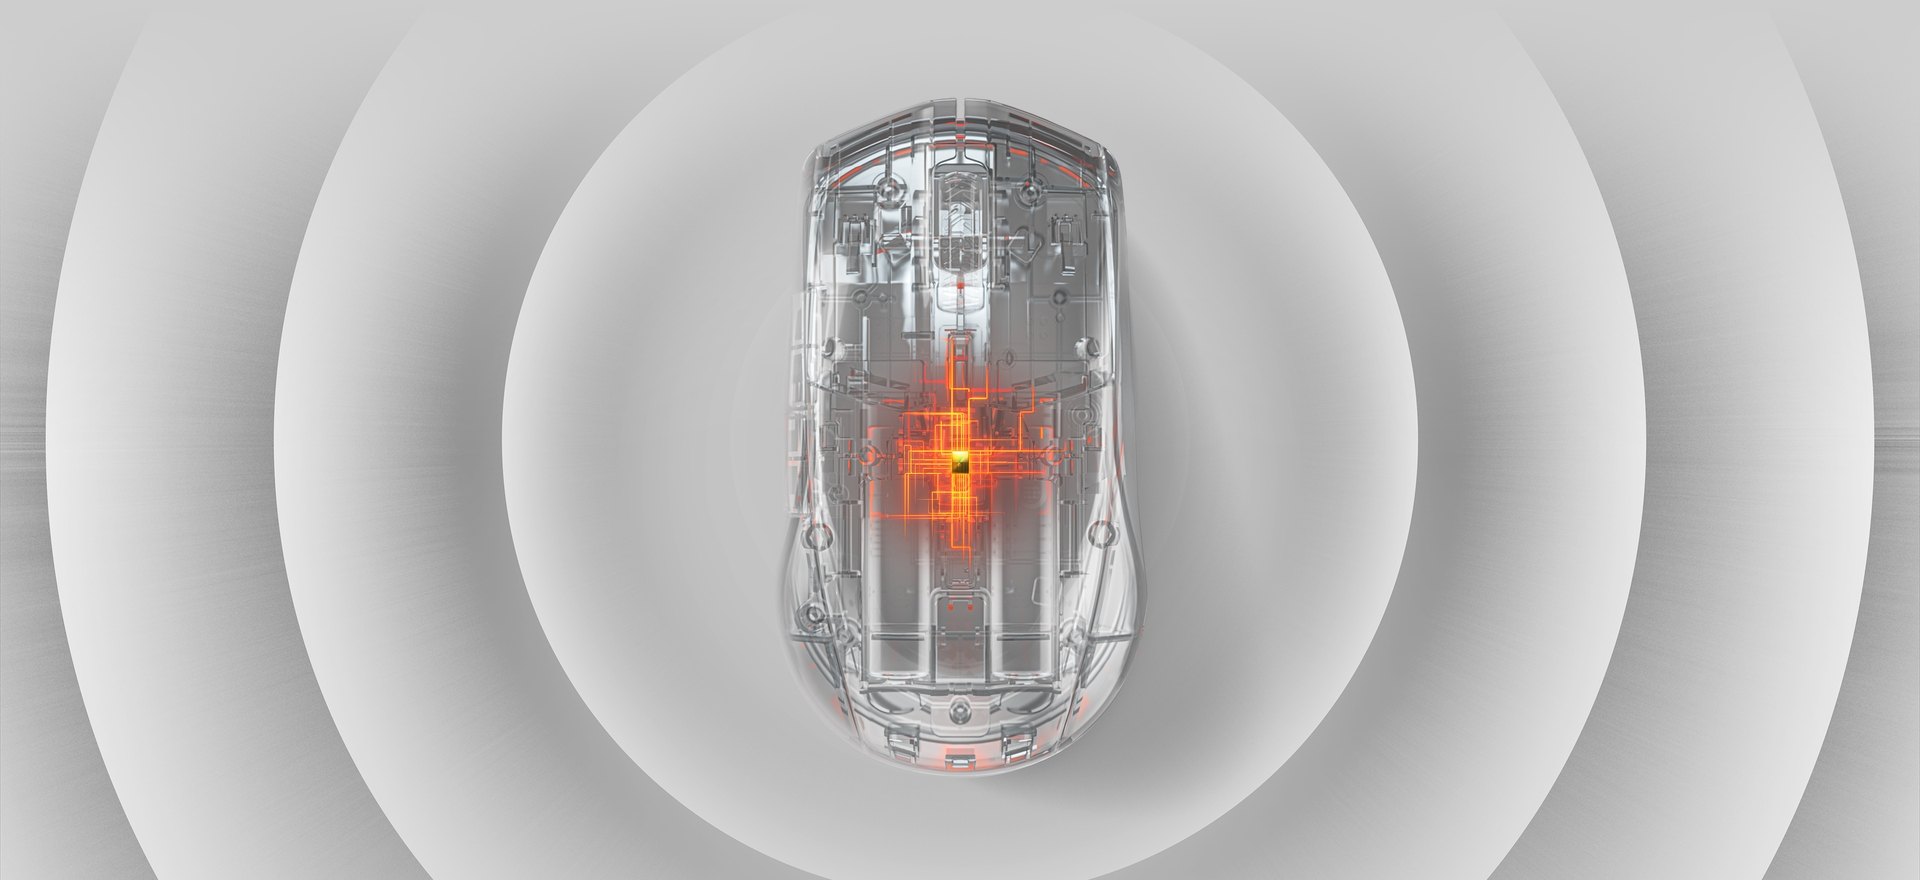 Rival 3 Wireless in an X-ray look with the interior contents of the mouse illuminated